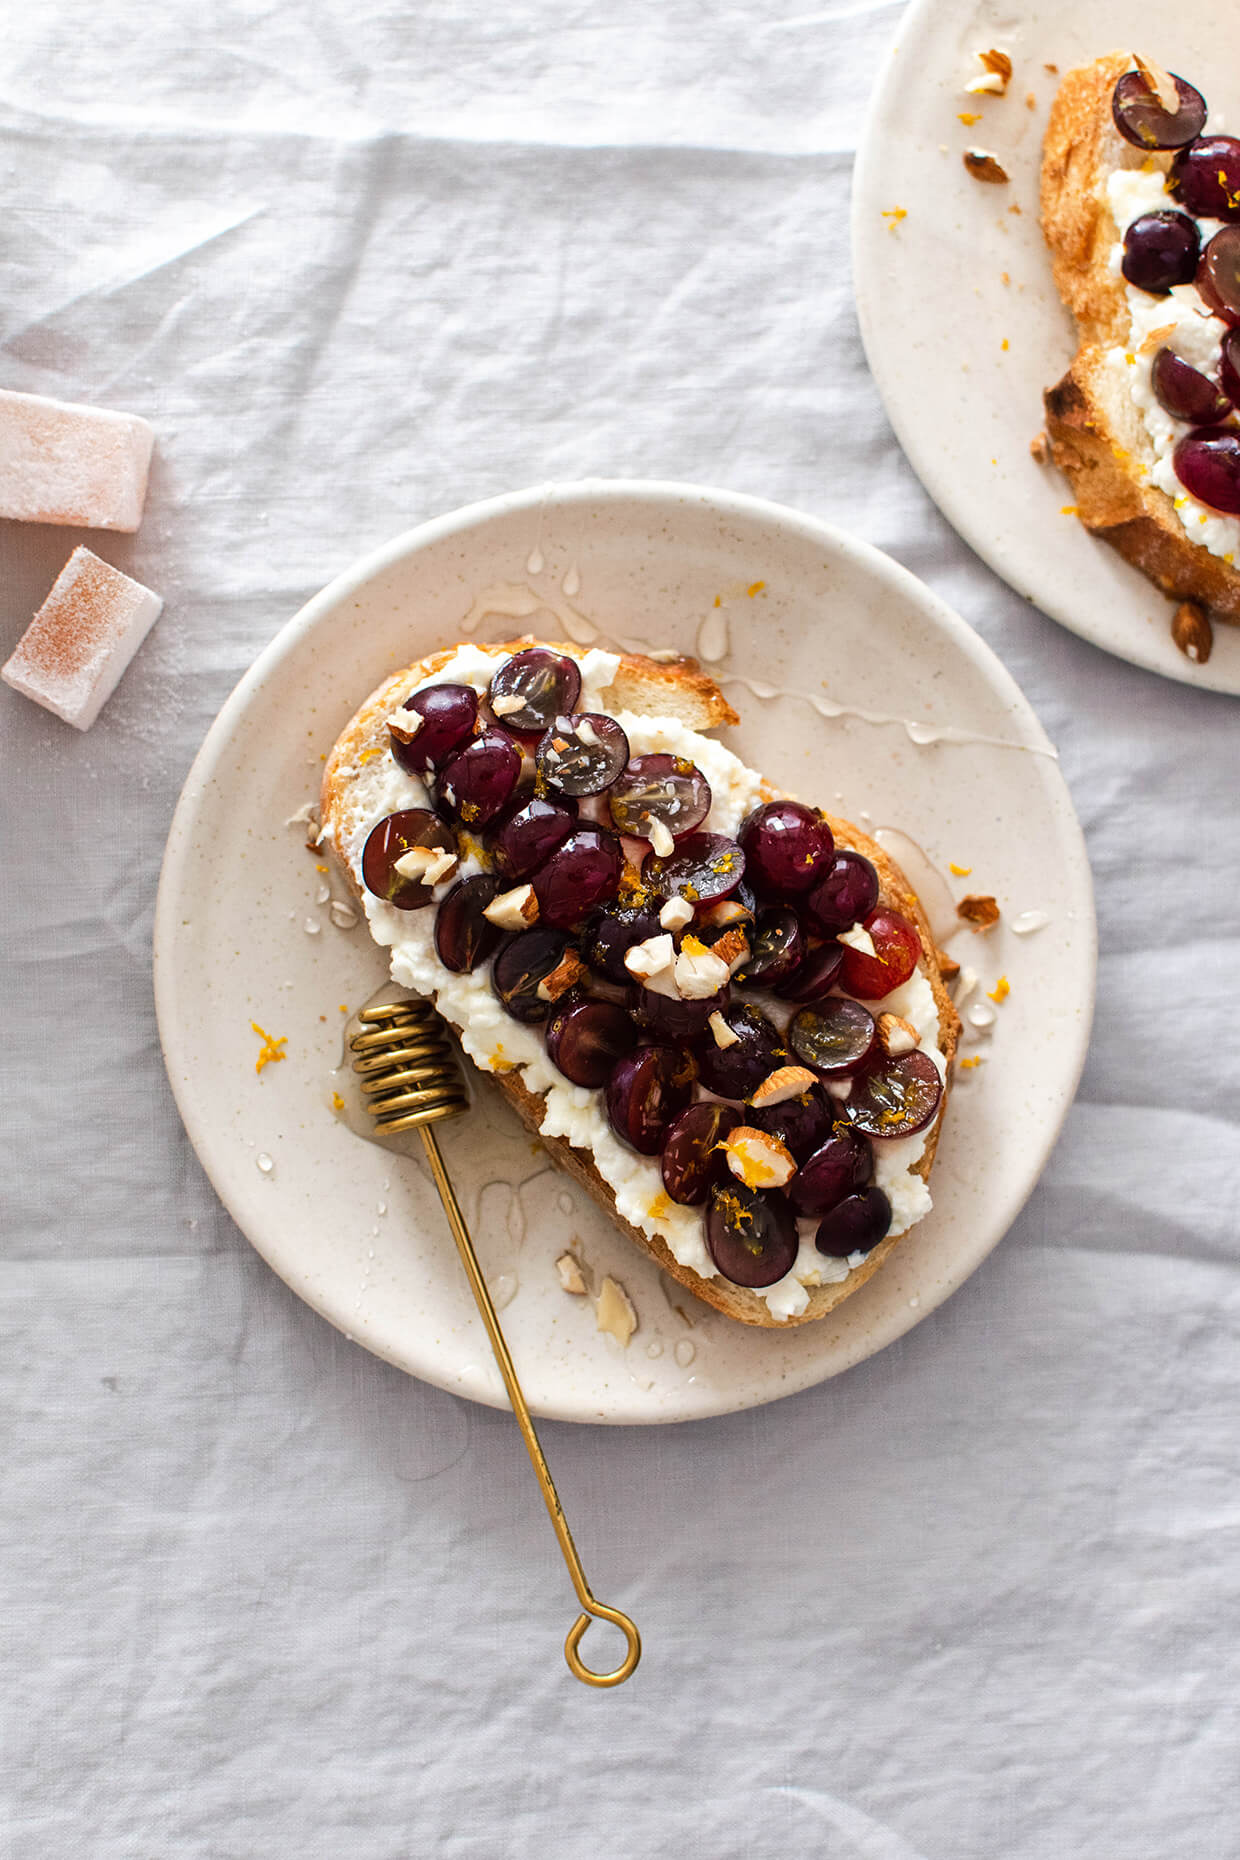 Sweet cottage cheese toast with grapes, a crunchy and juicy loaded toast that makes the perfect breakfast.